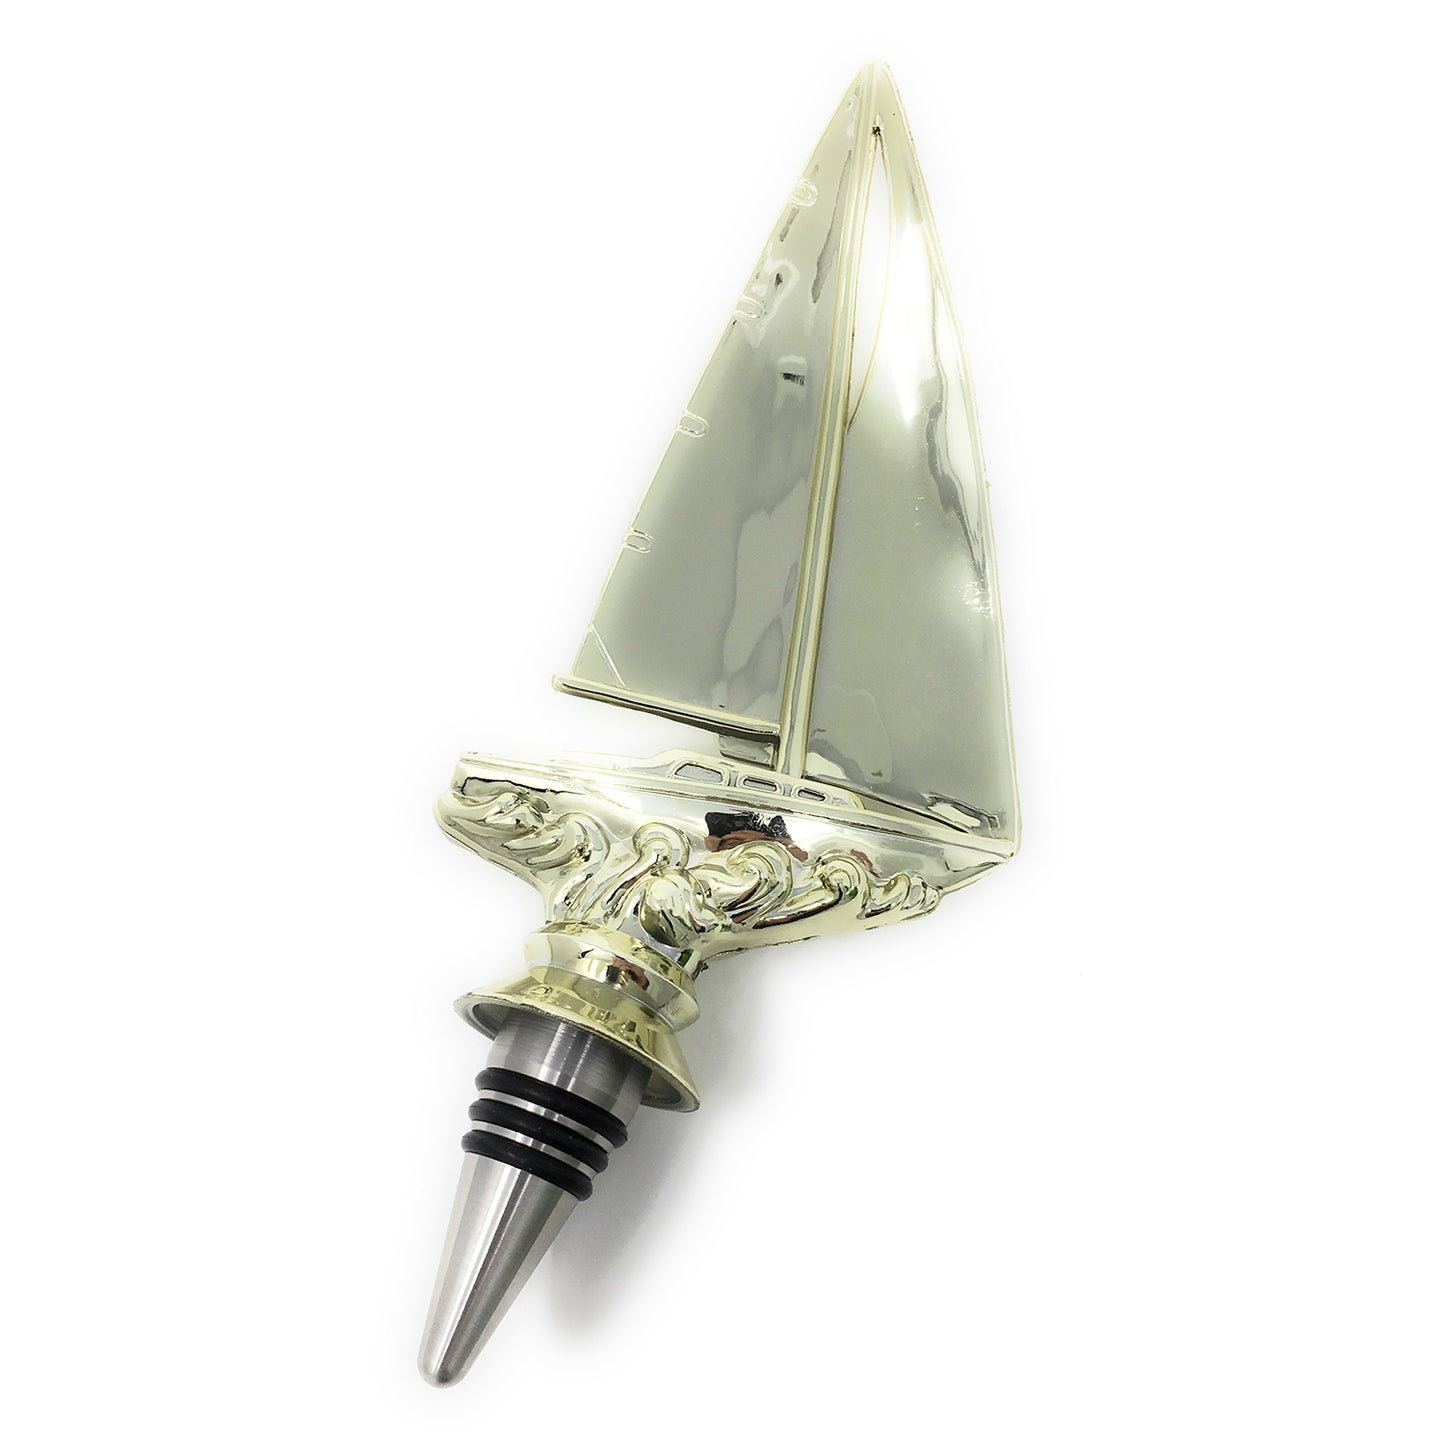 Sailboat Trophy Wine Bottle Stopper with Stainless Steel Base